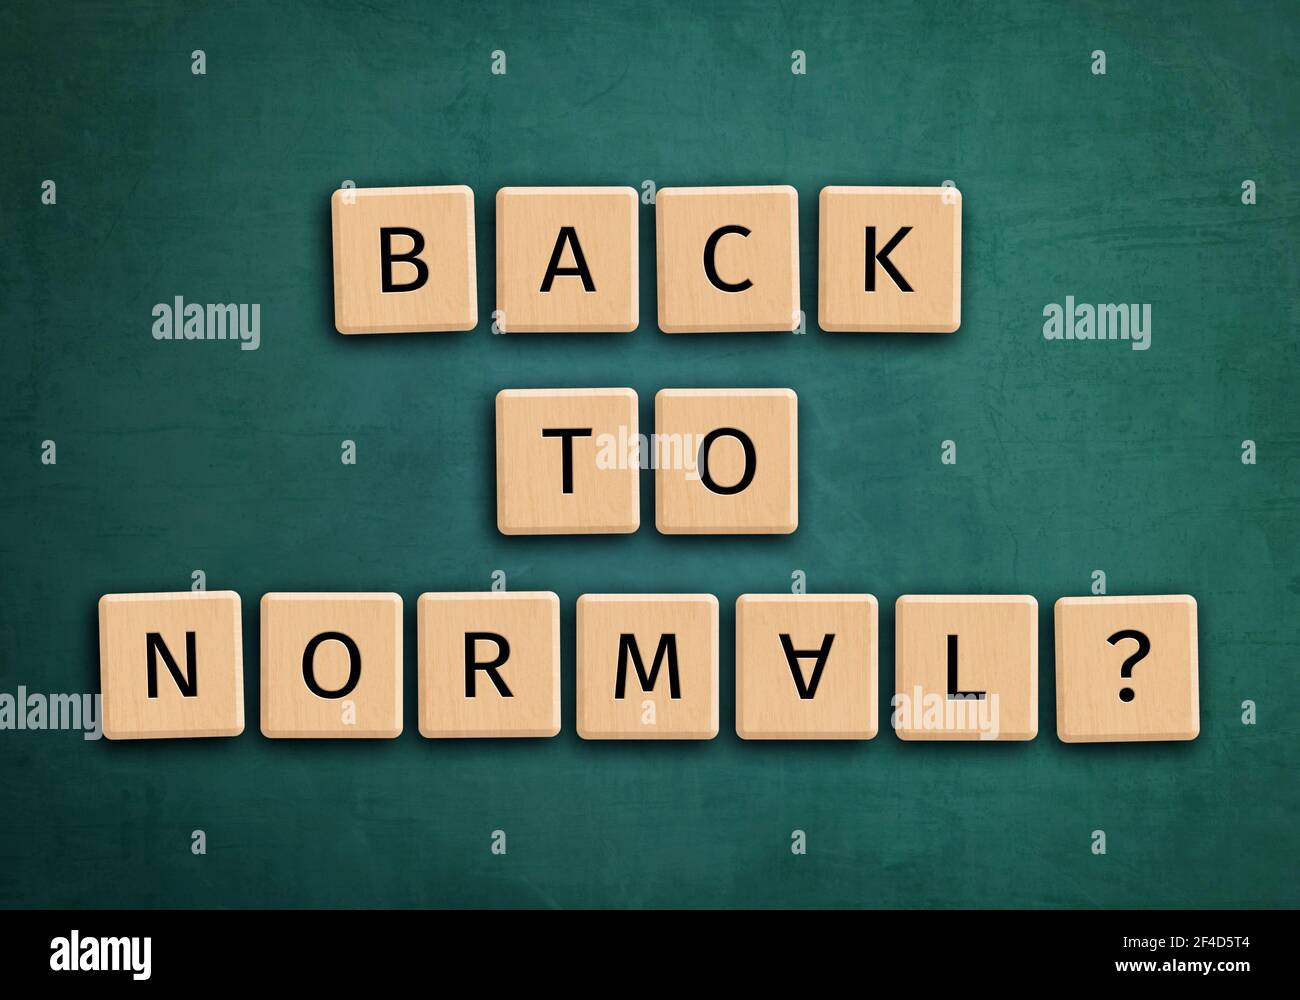 Back to normal letters on green chalkboard Stock Photo